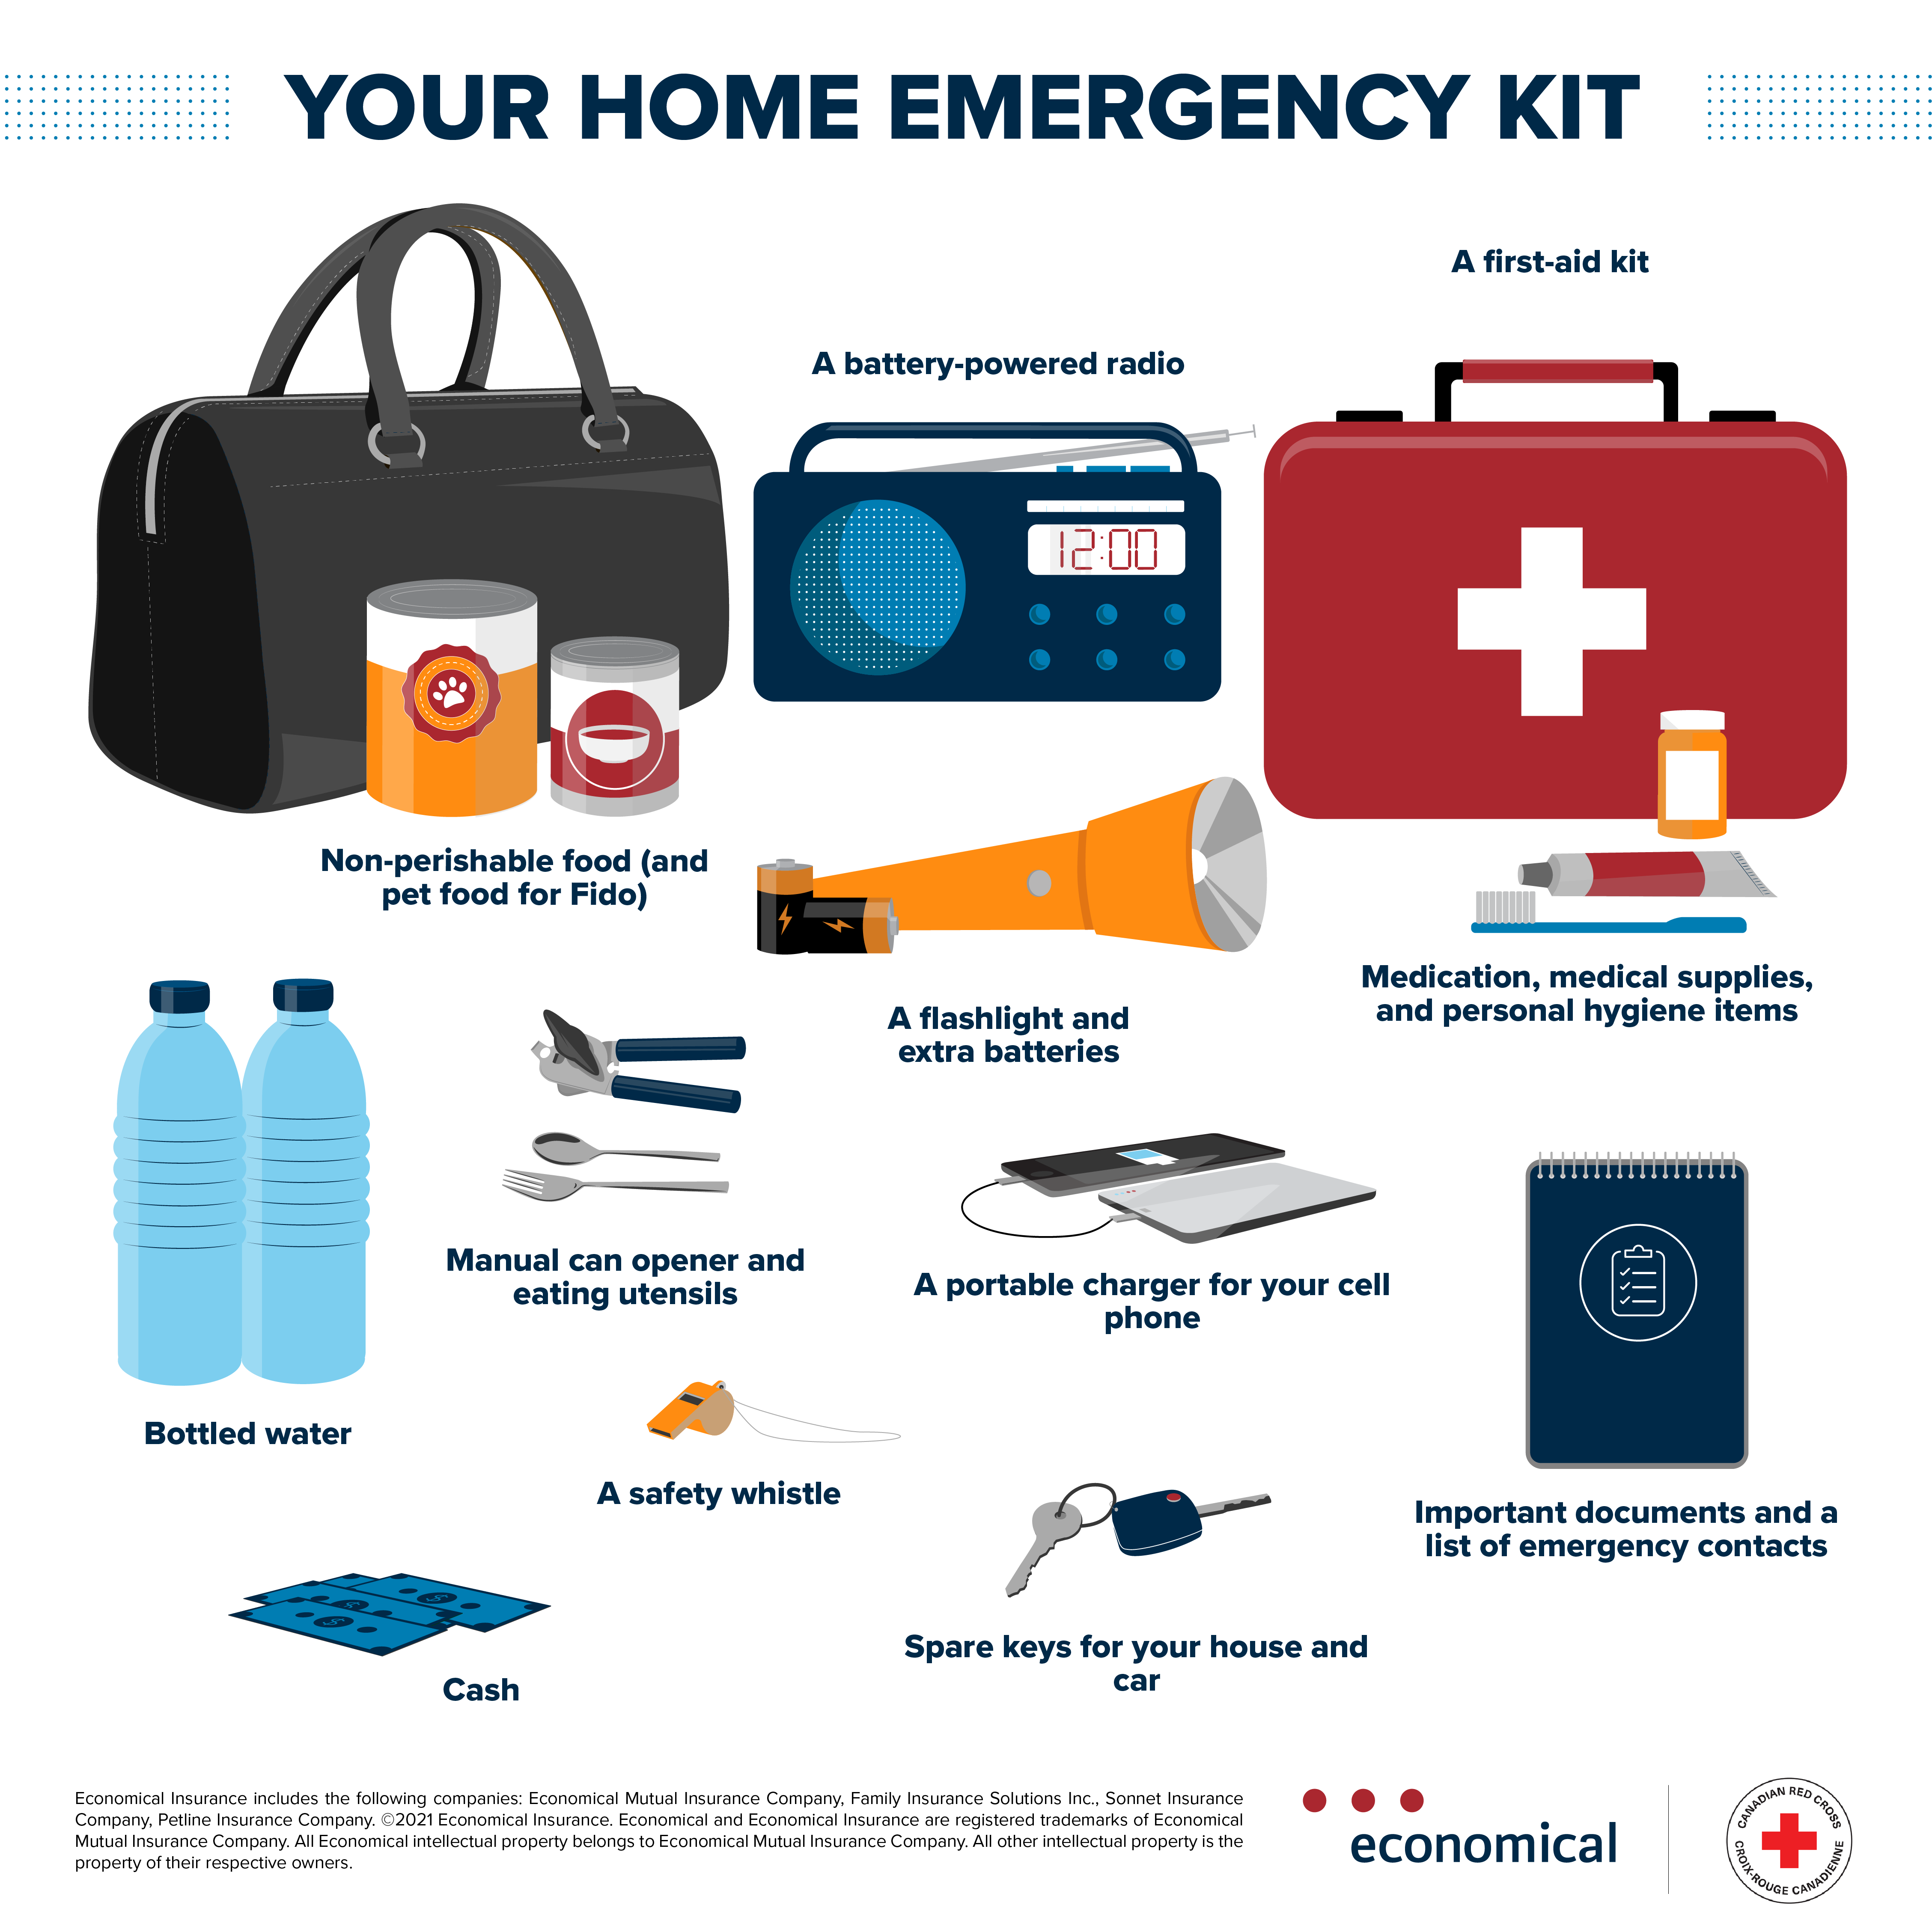 10 items to keep in your home emergency preparedness kit